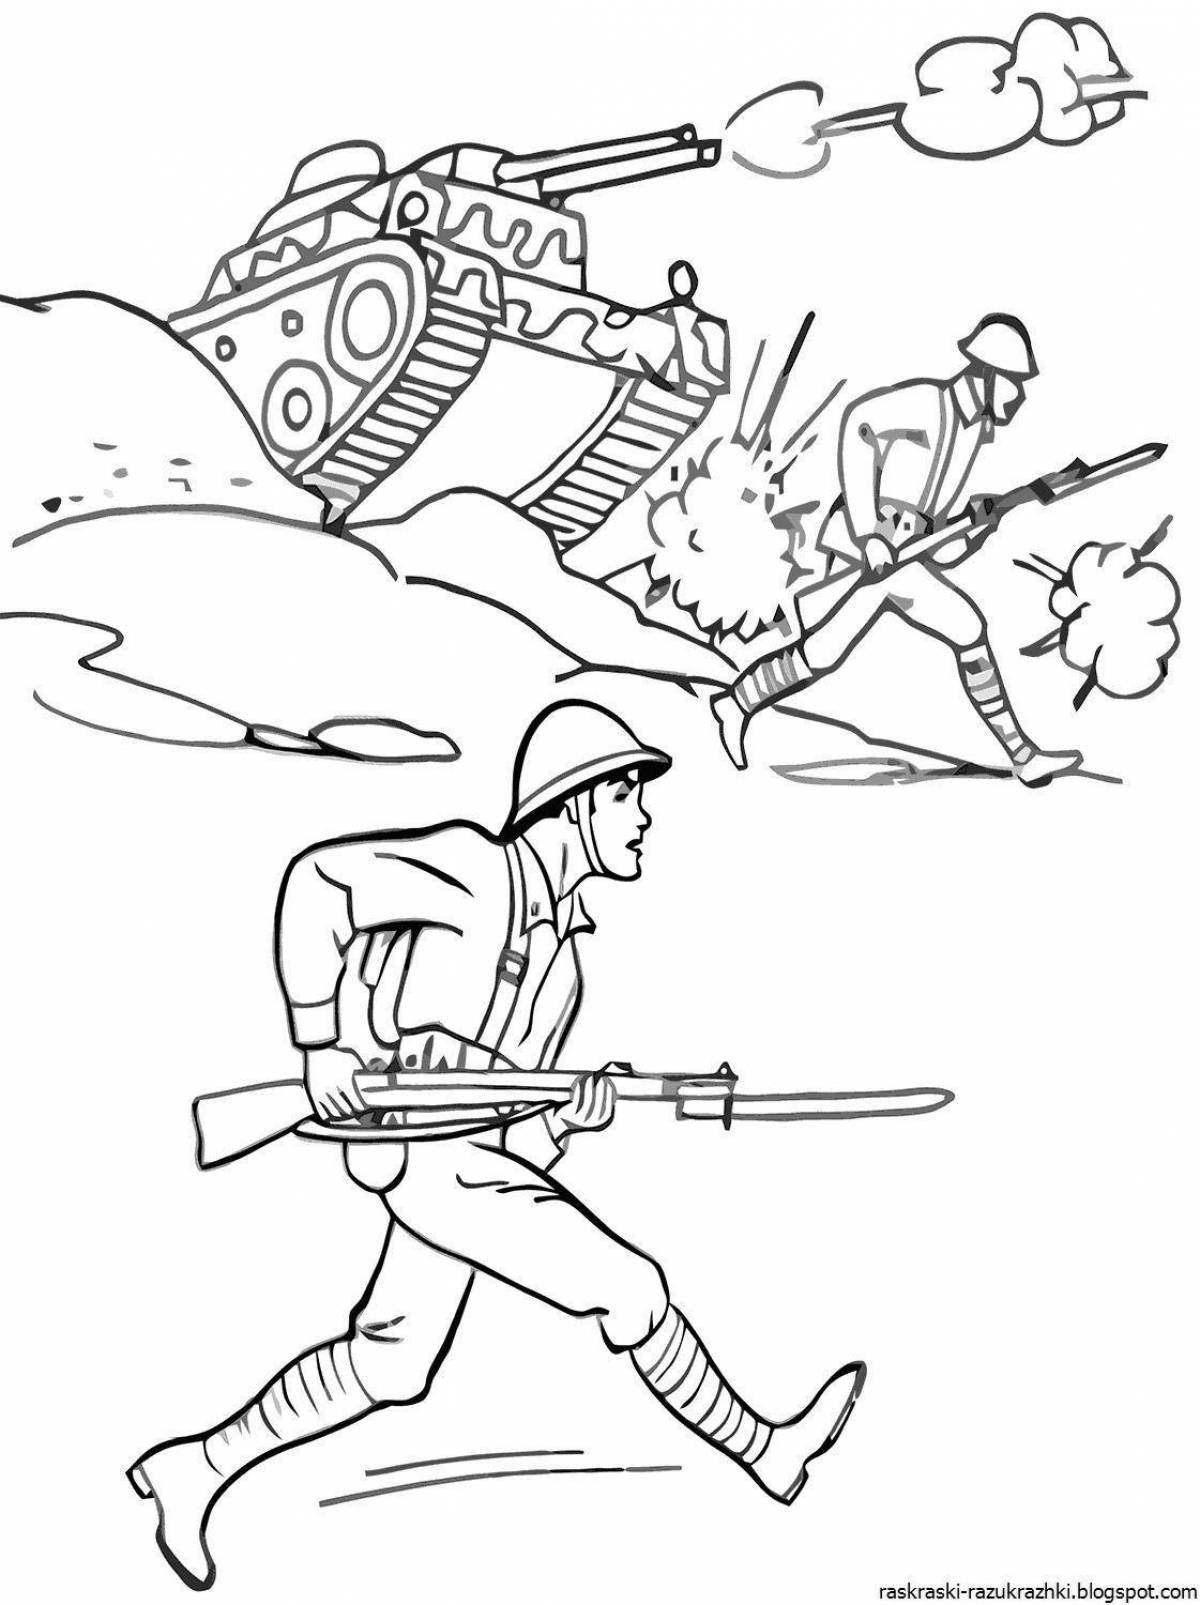 Majestic war heroes coloring pages for kids